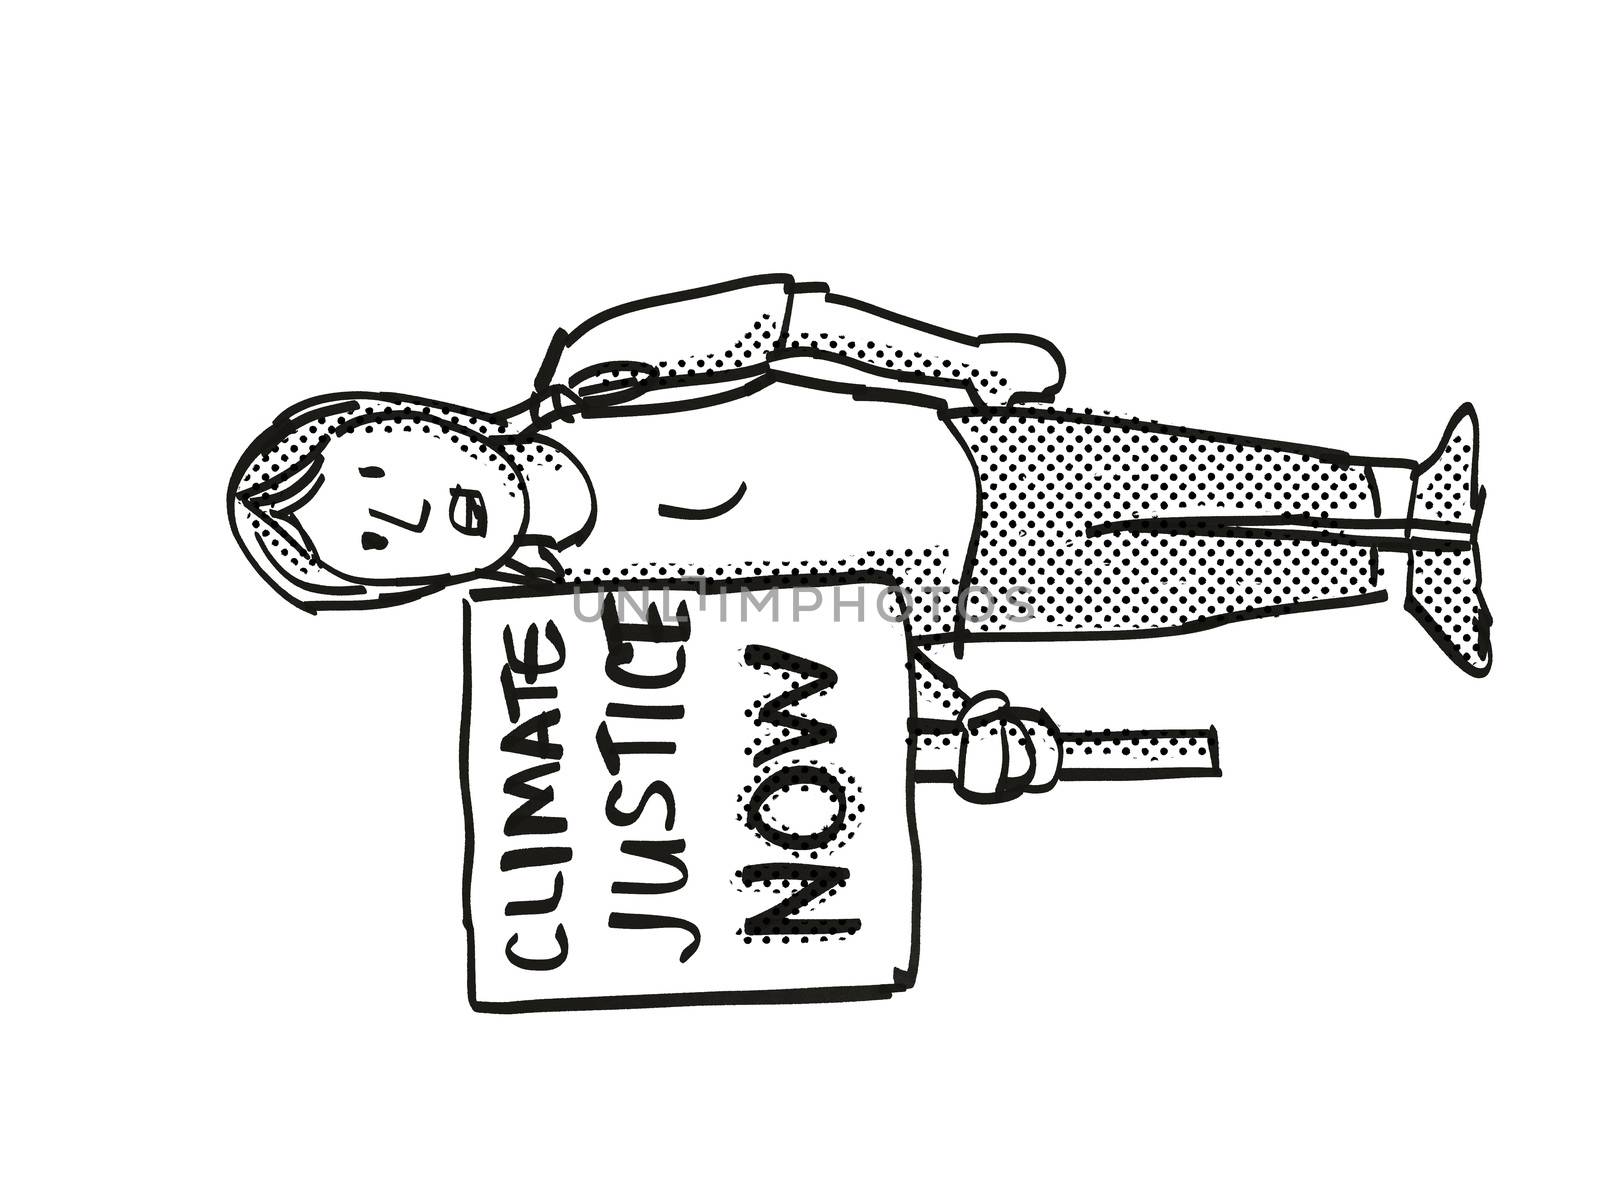 Cartoon style illustration of a young student or child with placard, Climate Justice Now protesting on Climate Change done in black and white on isolated background.